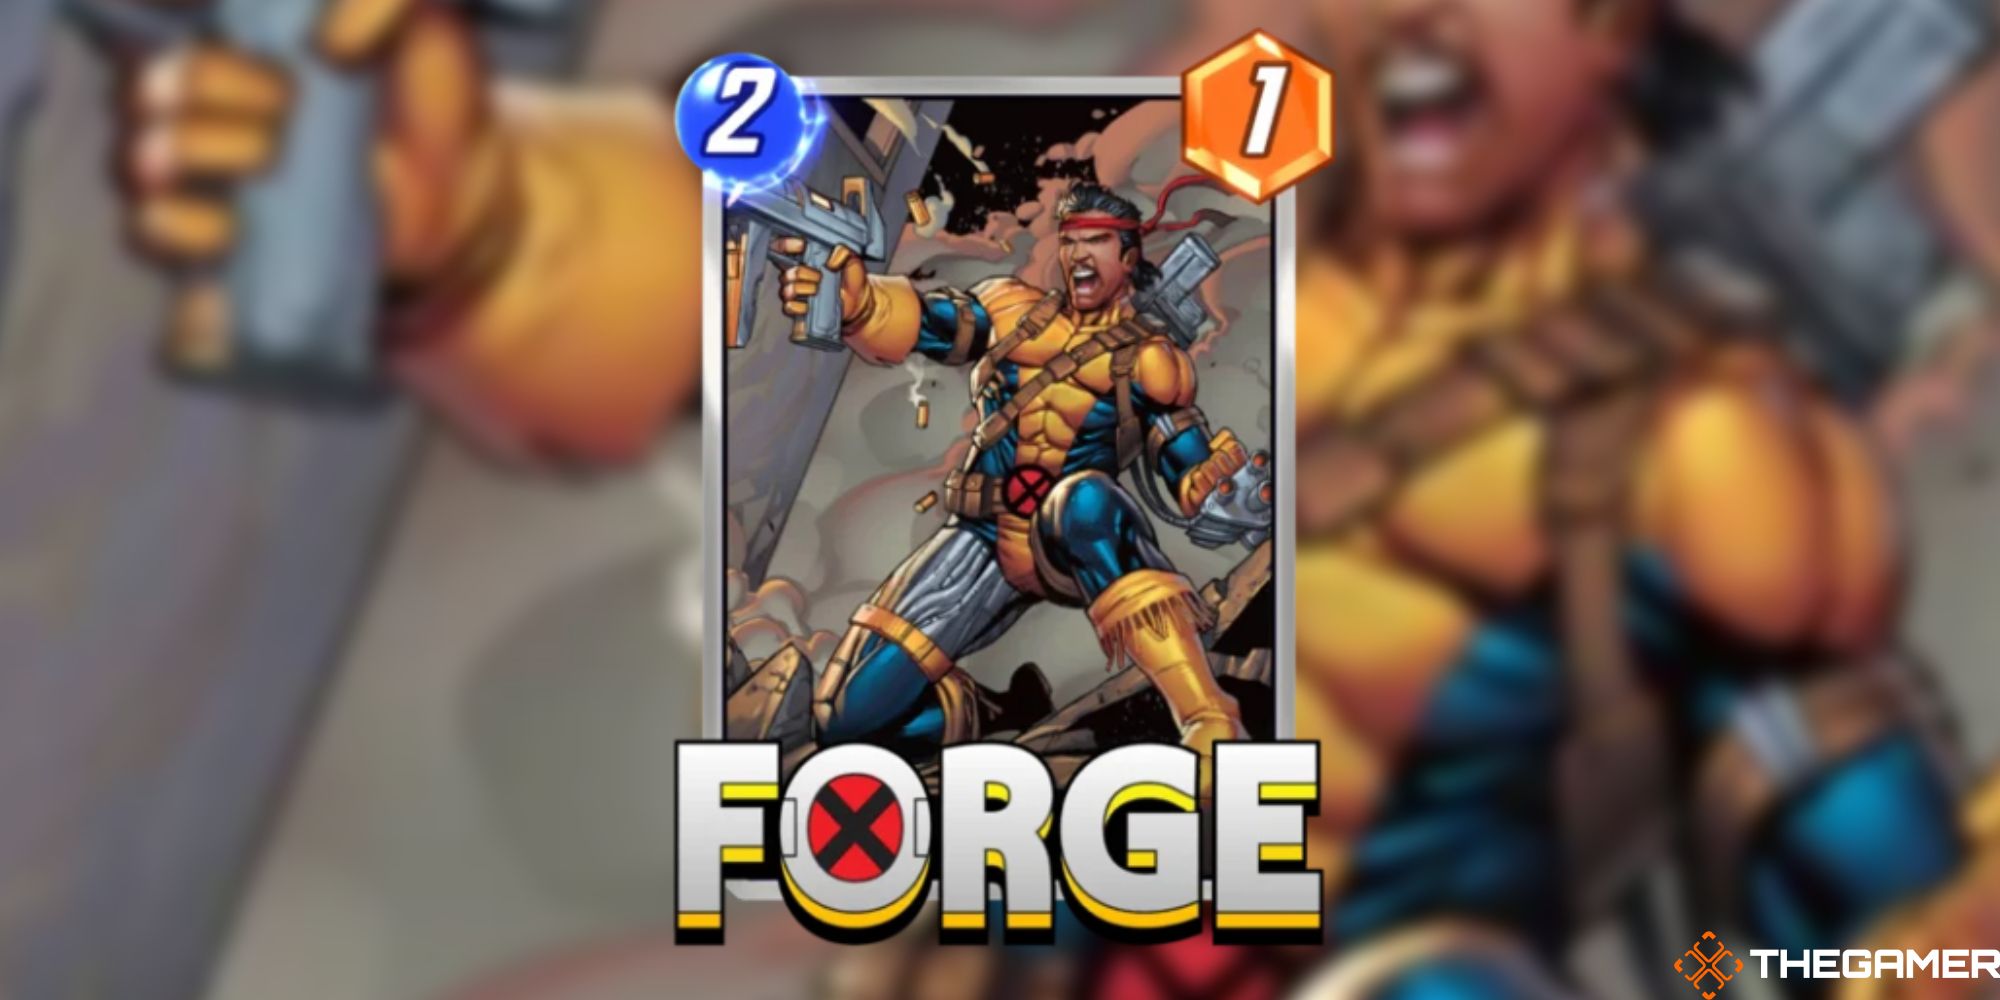 Marvel Snap - Forge on a blurred background